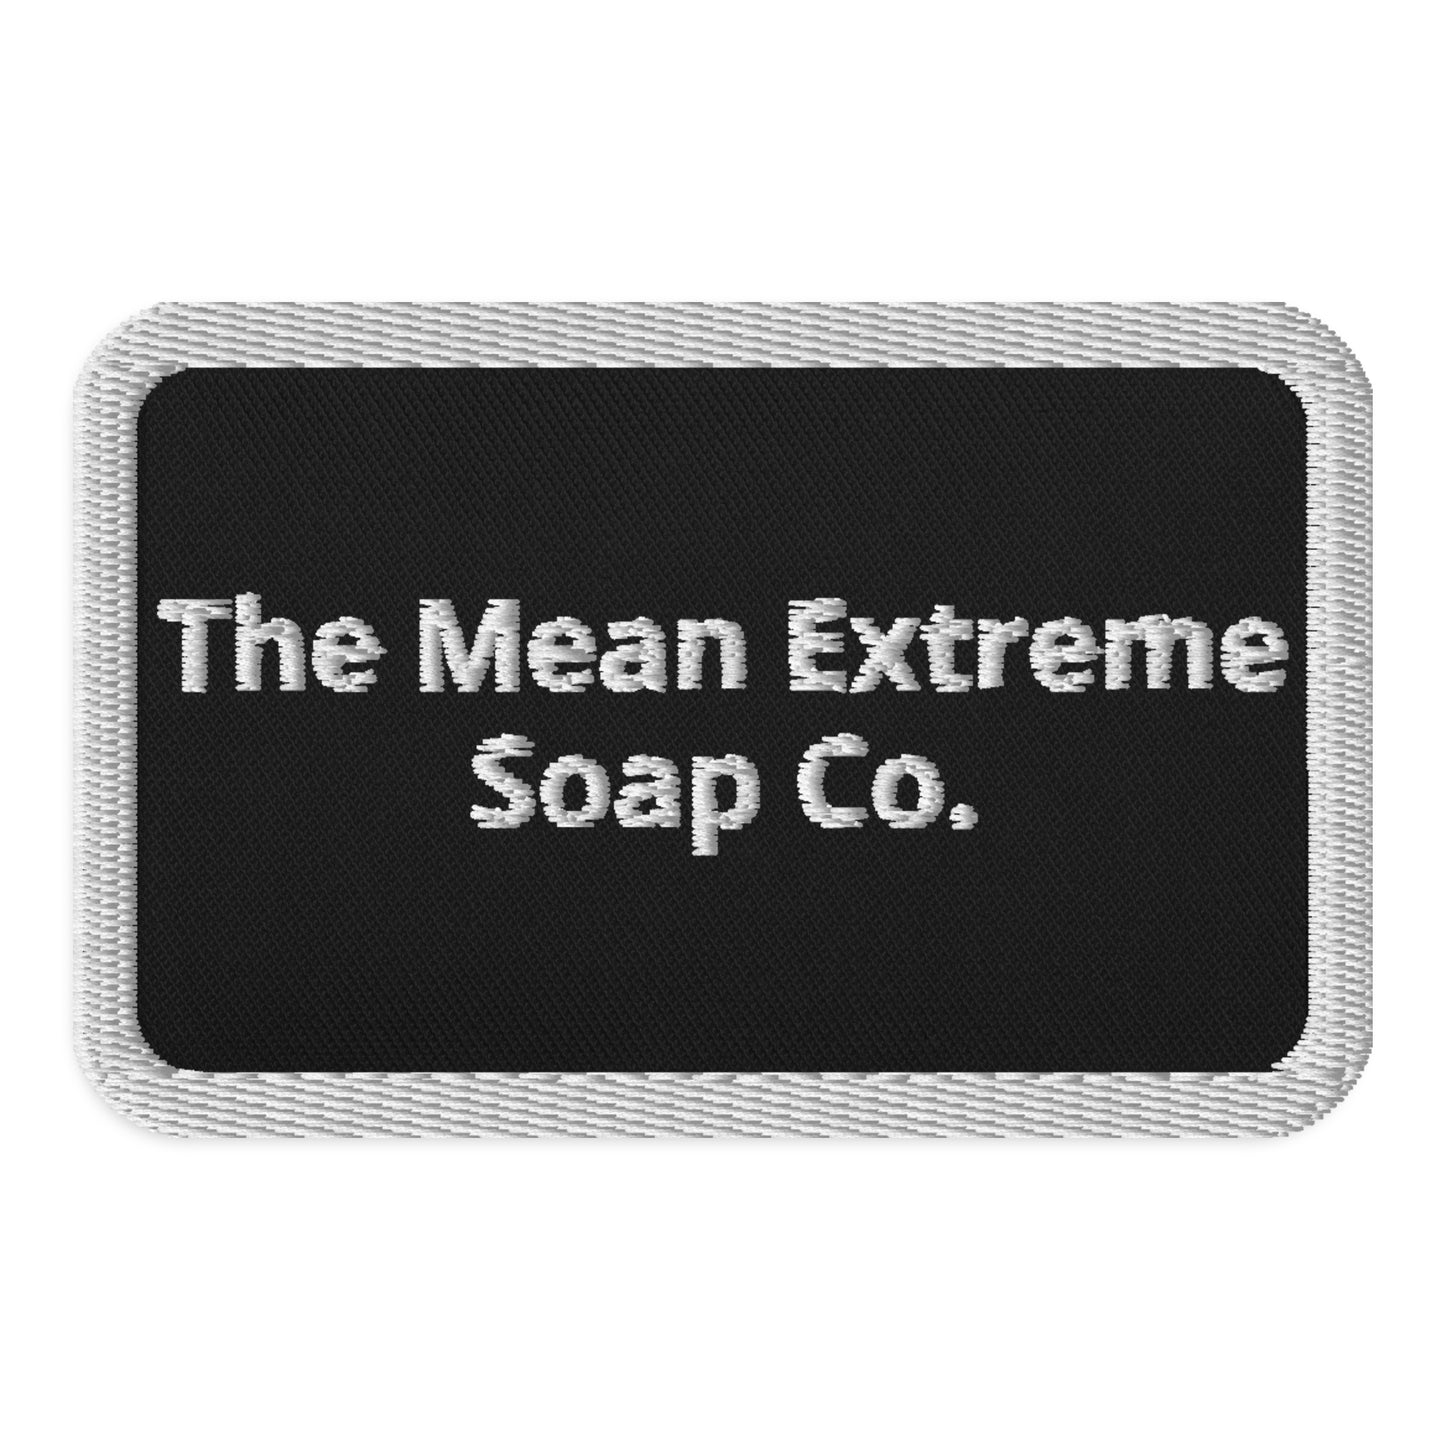 The Mean Extreme Embroidered Patch